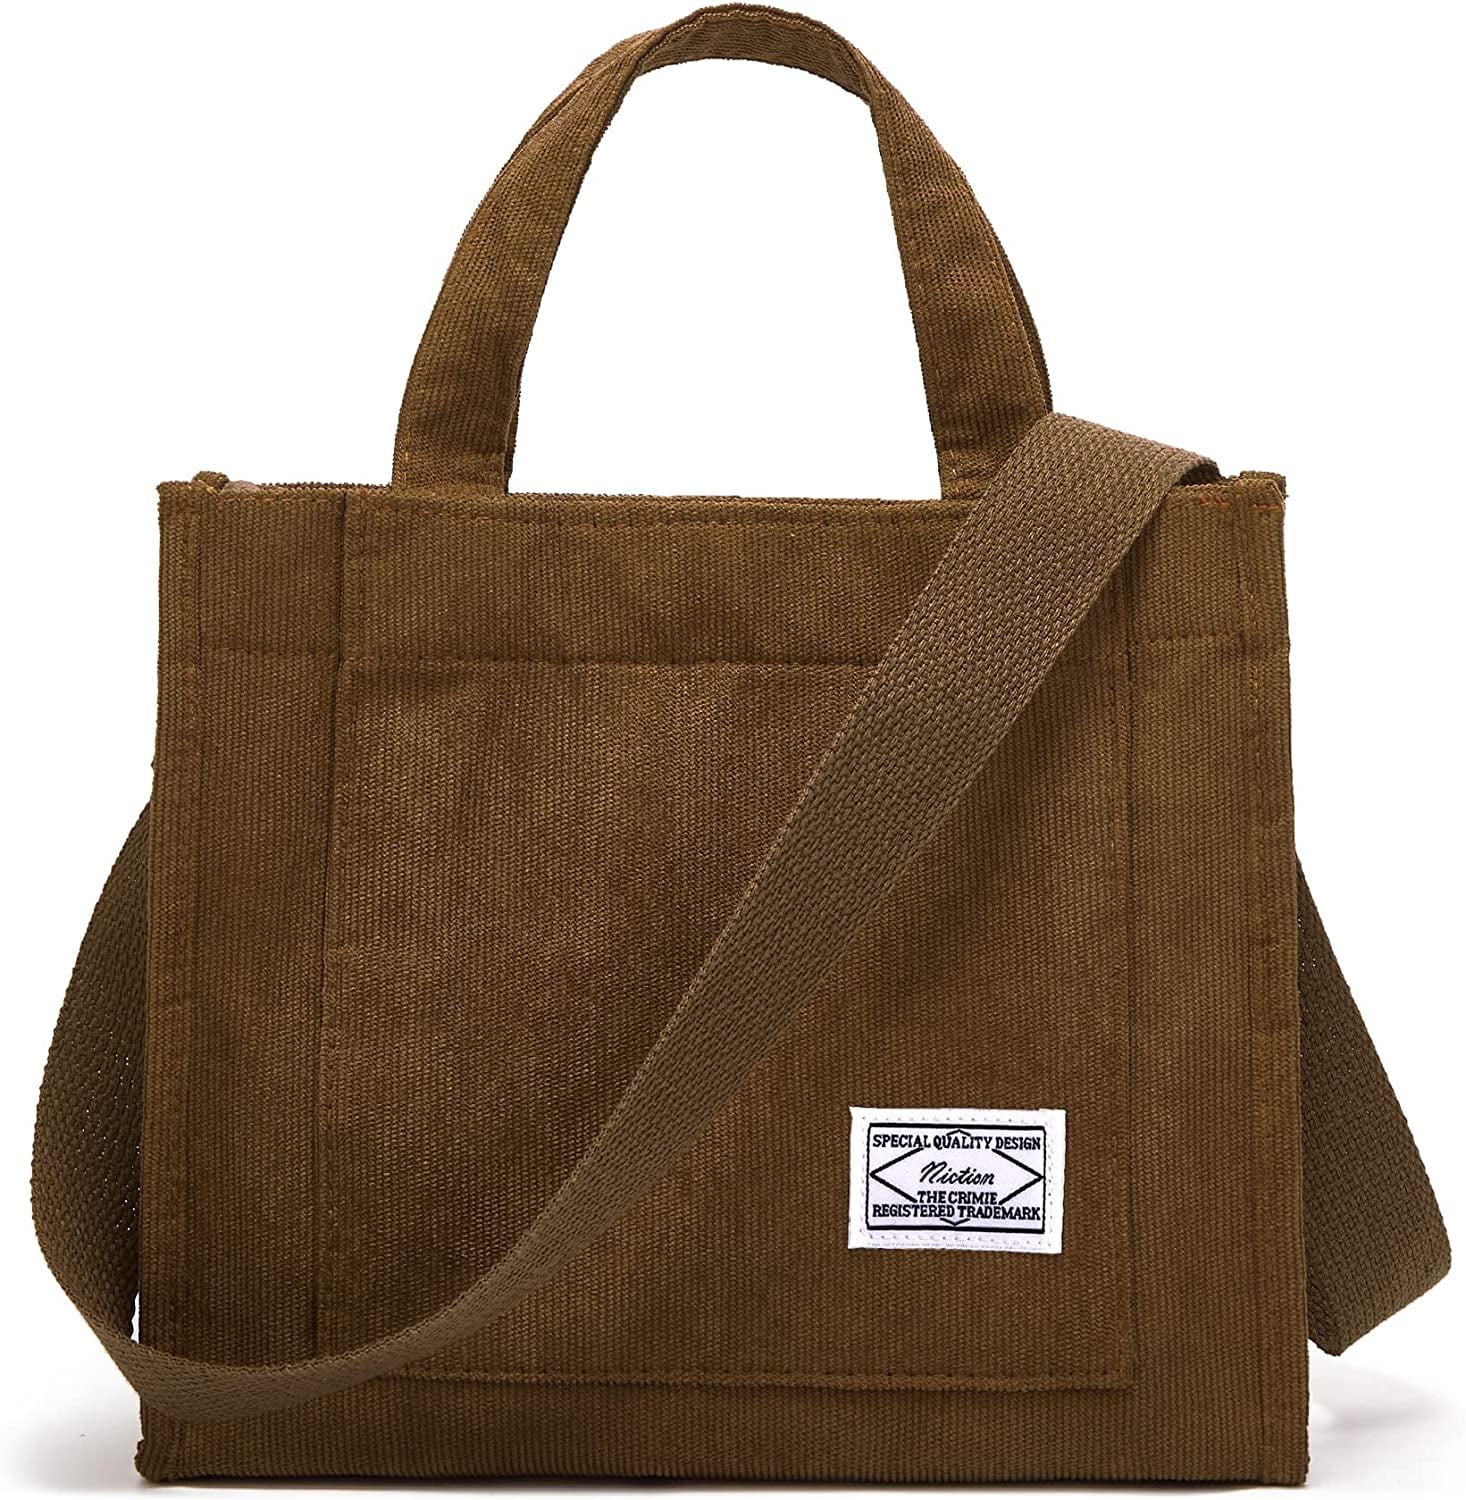 Stylish Corduroy Tote Bag | Made in Canada | Durable and Sustainable -  Poured Coffee/The RE Place